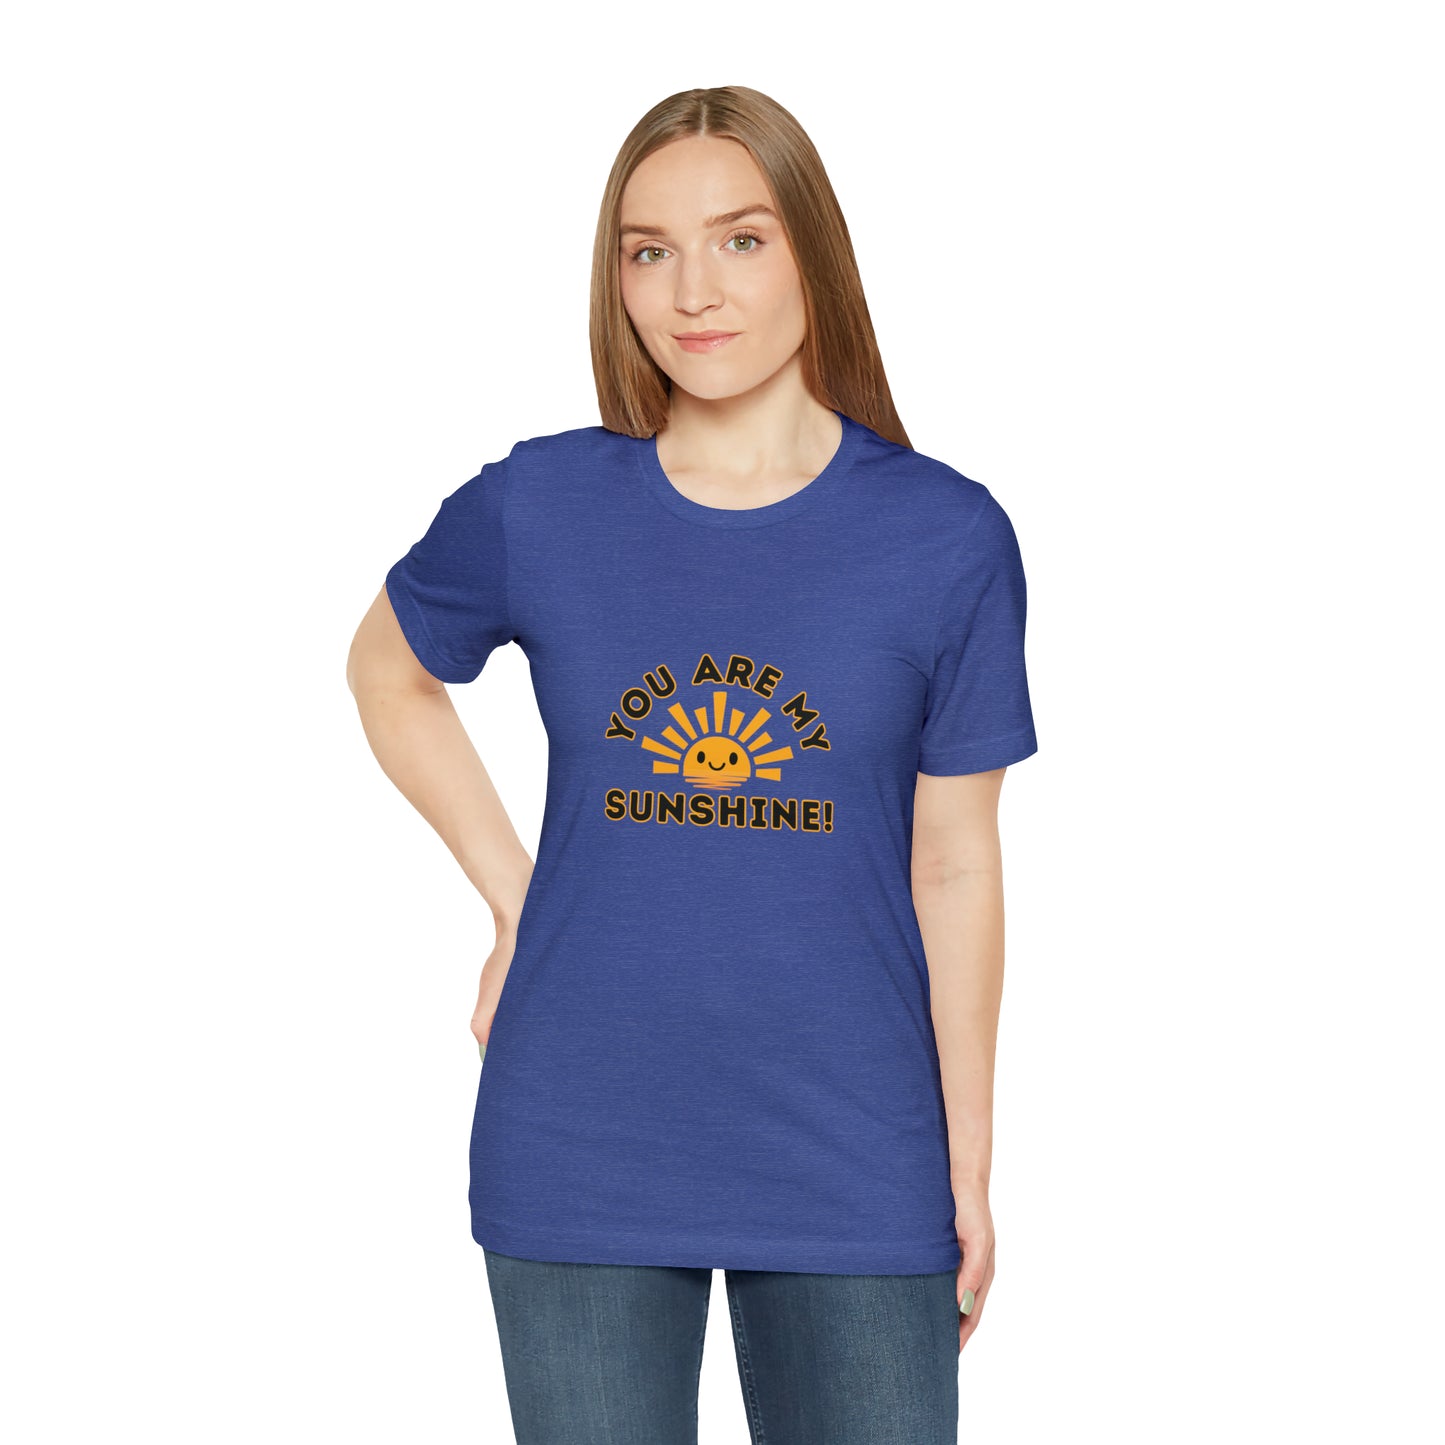 Positive, You Are My Sunshine, Happiness- Adult, Regular Fit, Soft Cotton, T-shirt